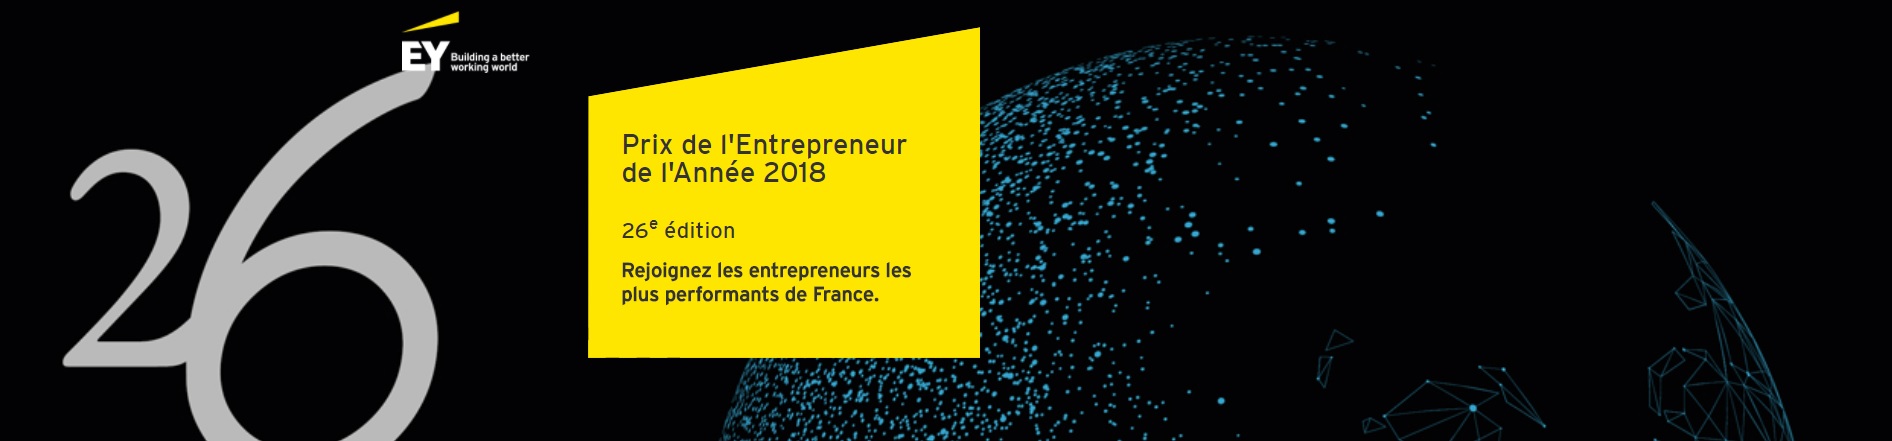 EY prize startup of the year kickmaker